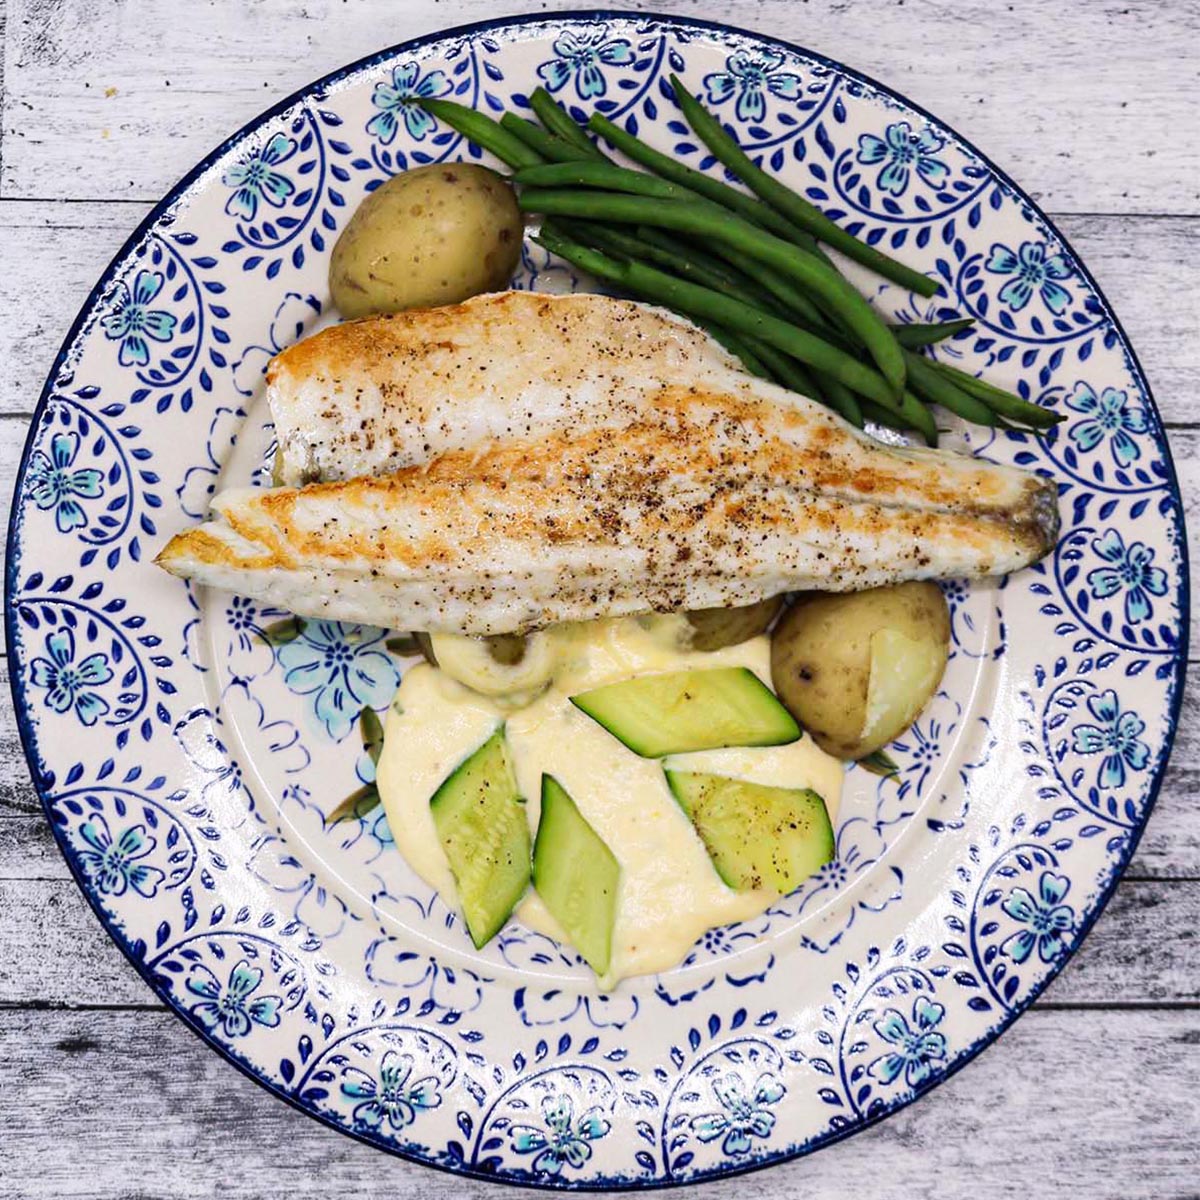 Sea Bass fillet on a blue and white plate with lemony sauce, boiled new potatoes, green beans and courgette